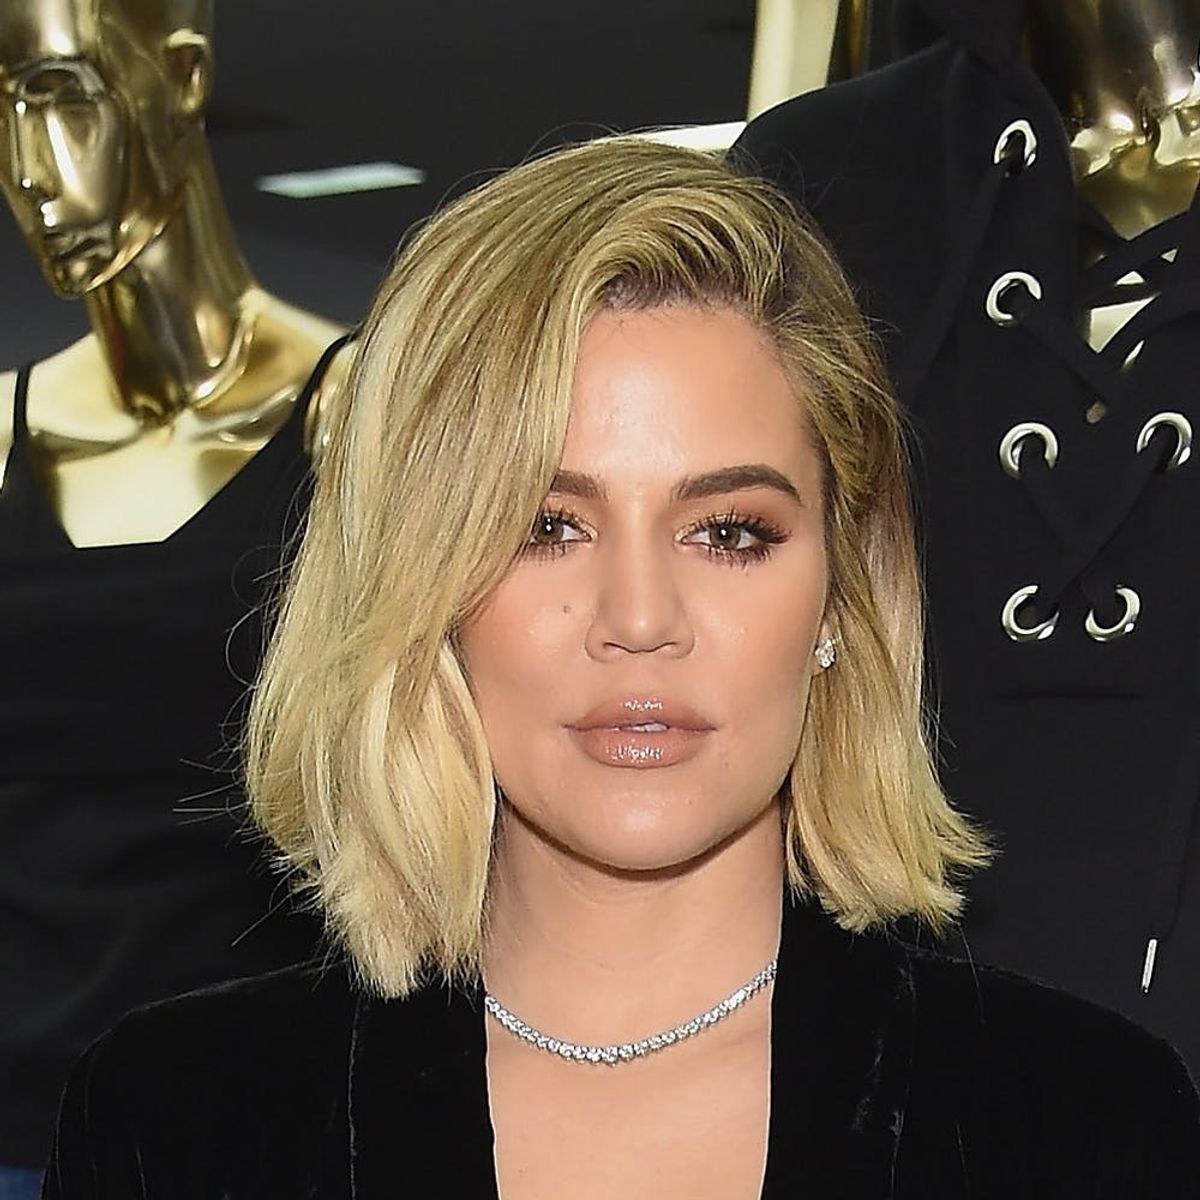 Khloé Kardashian Shares the Contents of Her Turkey Day Menu